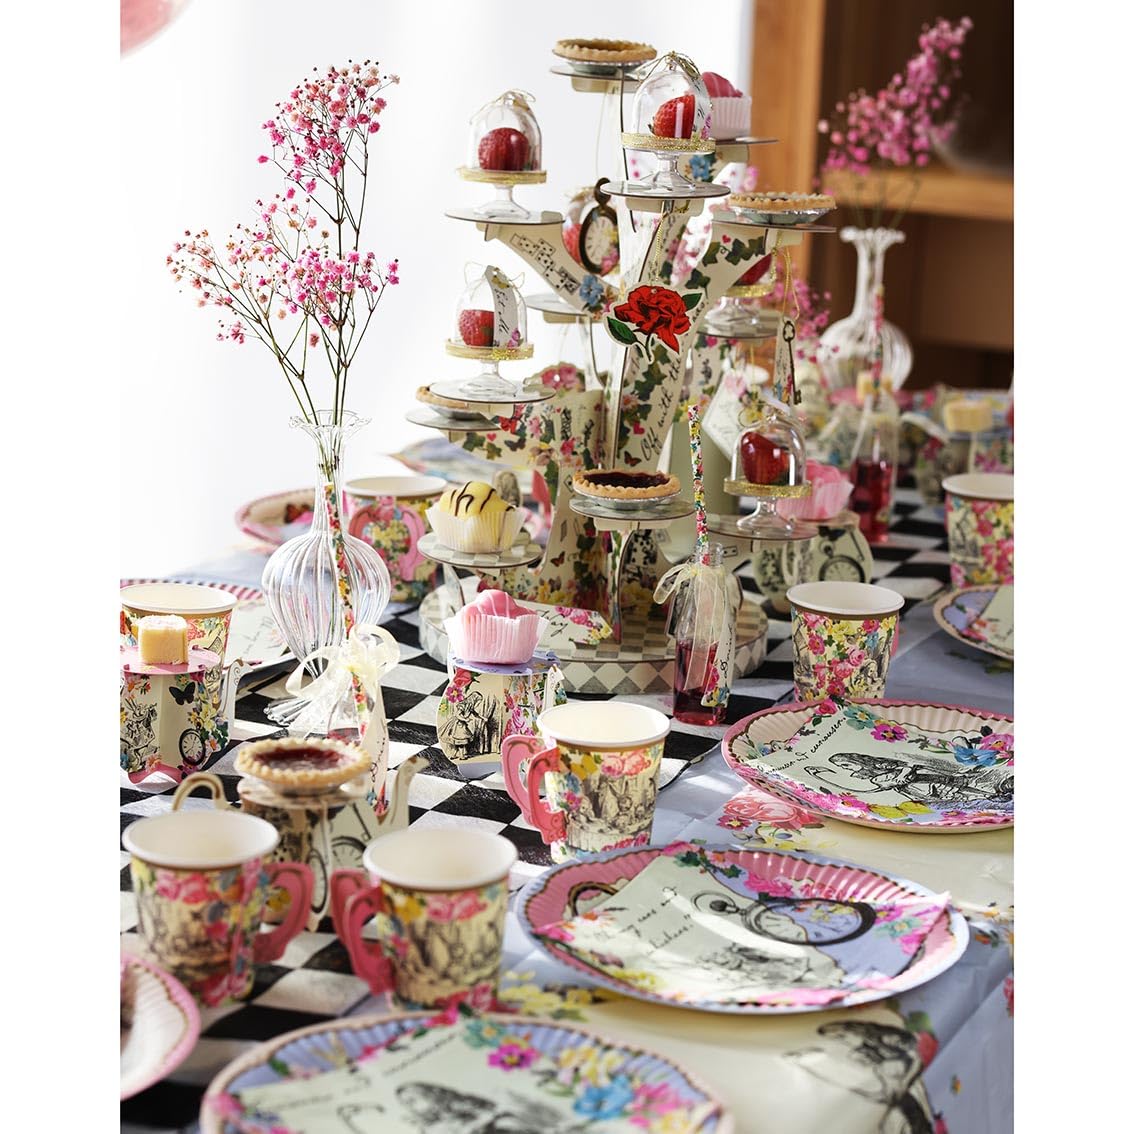 Talking Tables Alice in Wonderland Party Decorations & Tableware for 16 Guests, Plates Napkins Teacups Bunting Tablecover | Mad Hatter Afternoon Tea Supplies For Birthday, Baby Shower, Mother's Day